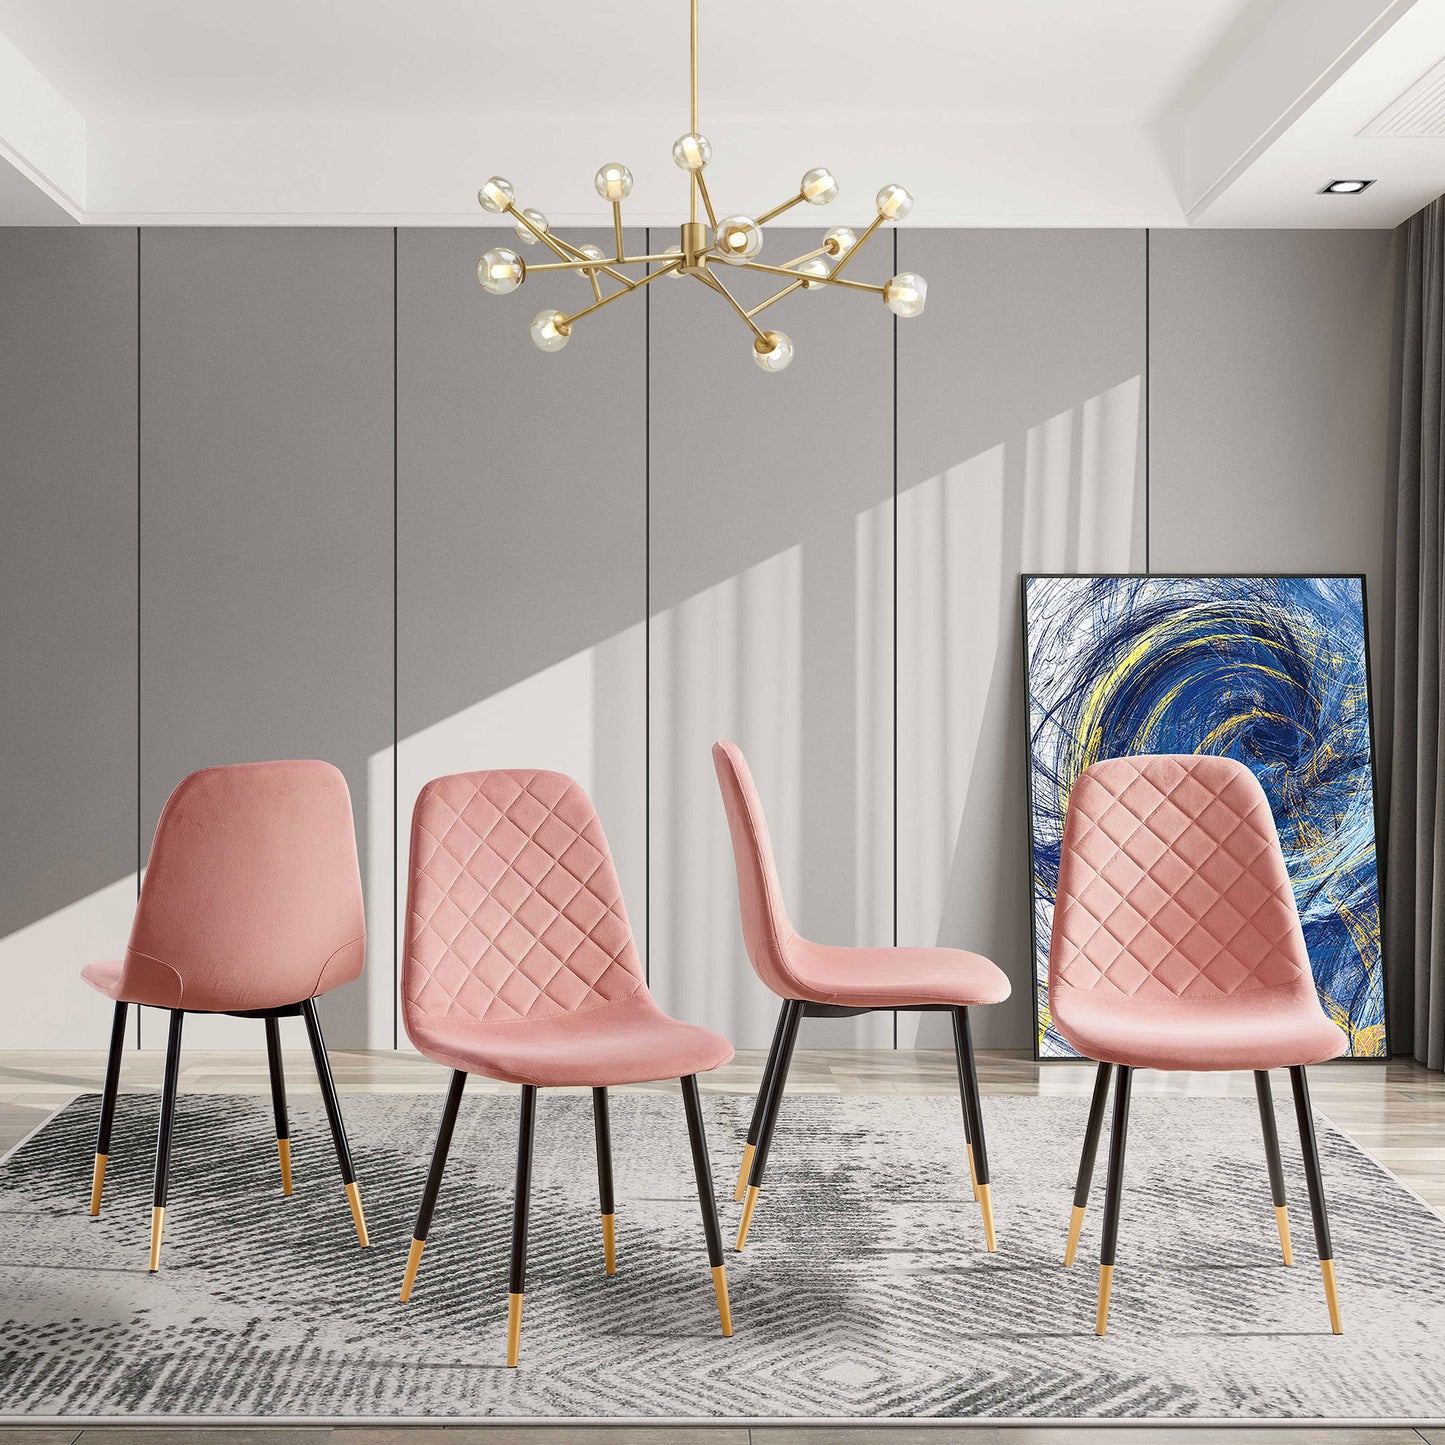 Pink Velvet Tufted Accent Chairs with Gold Metal Legs, Modern Dining Chairs for Living Room,Set of 4